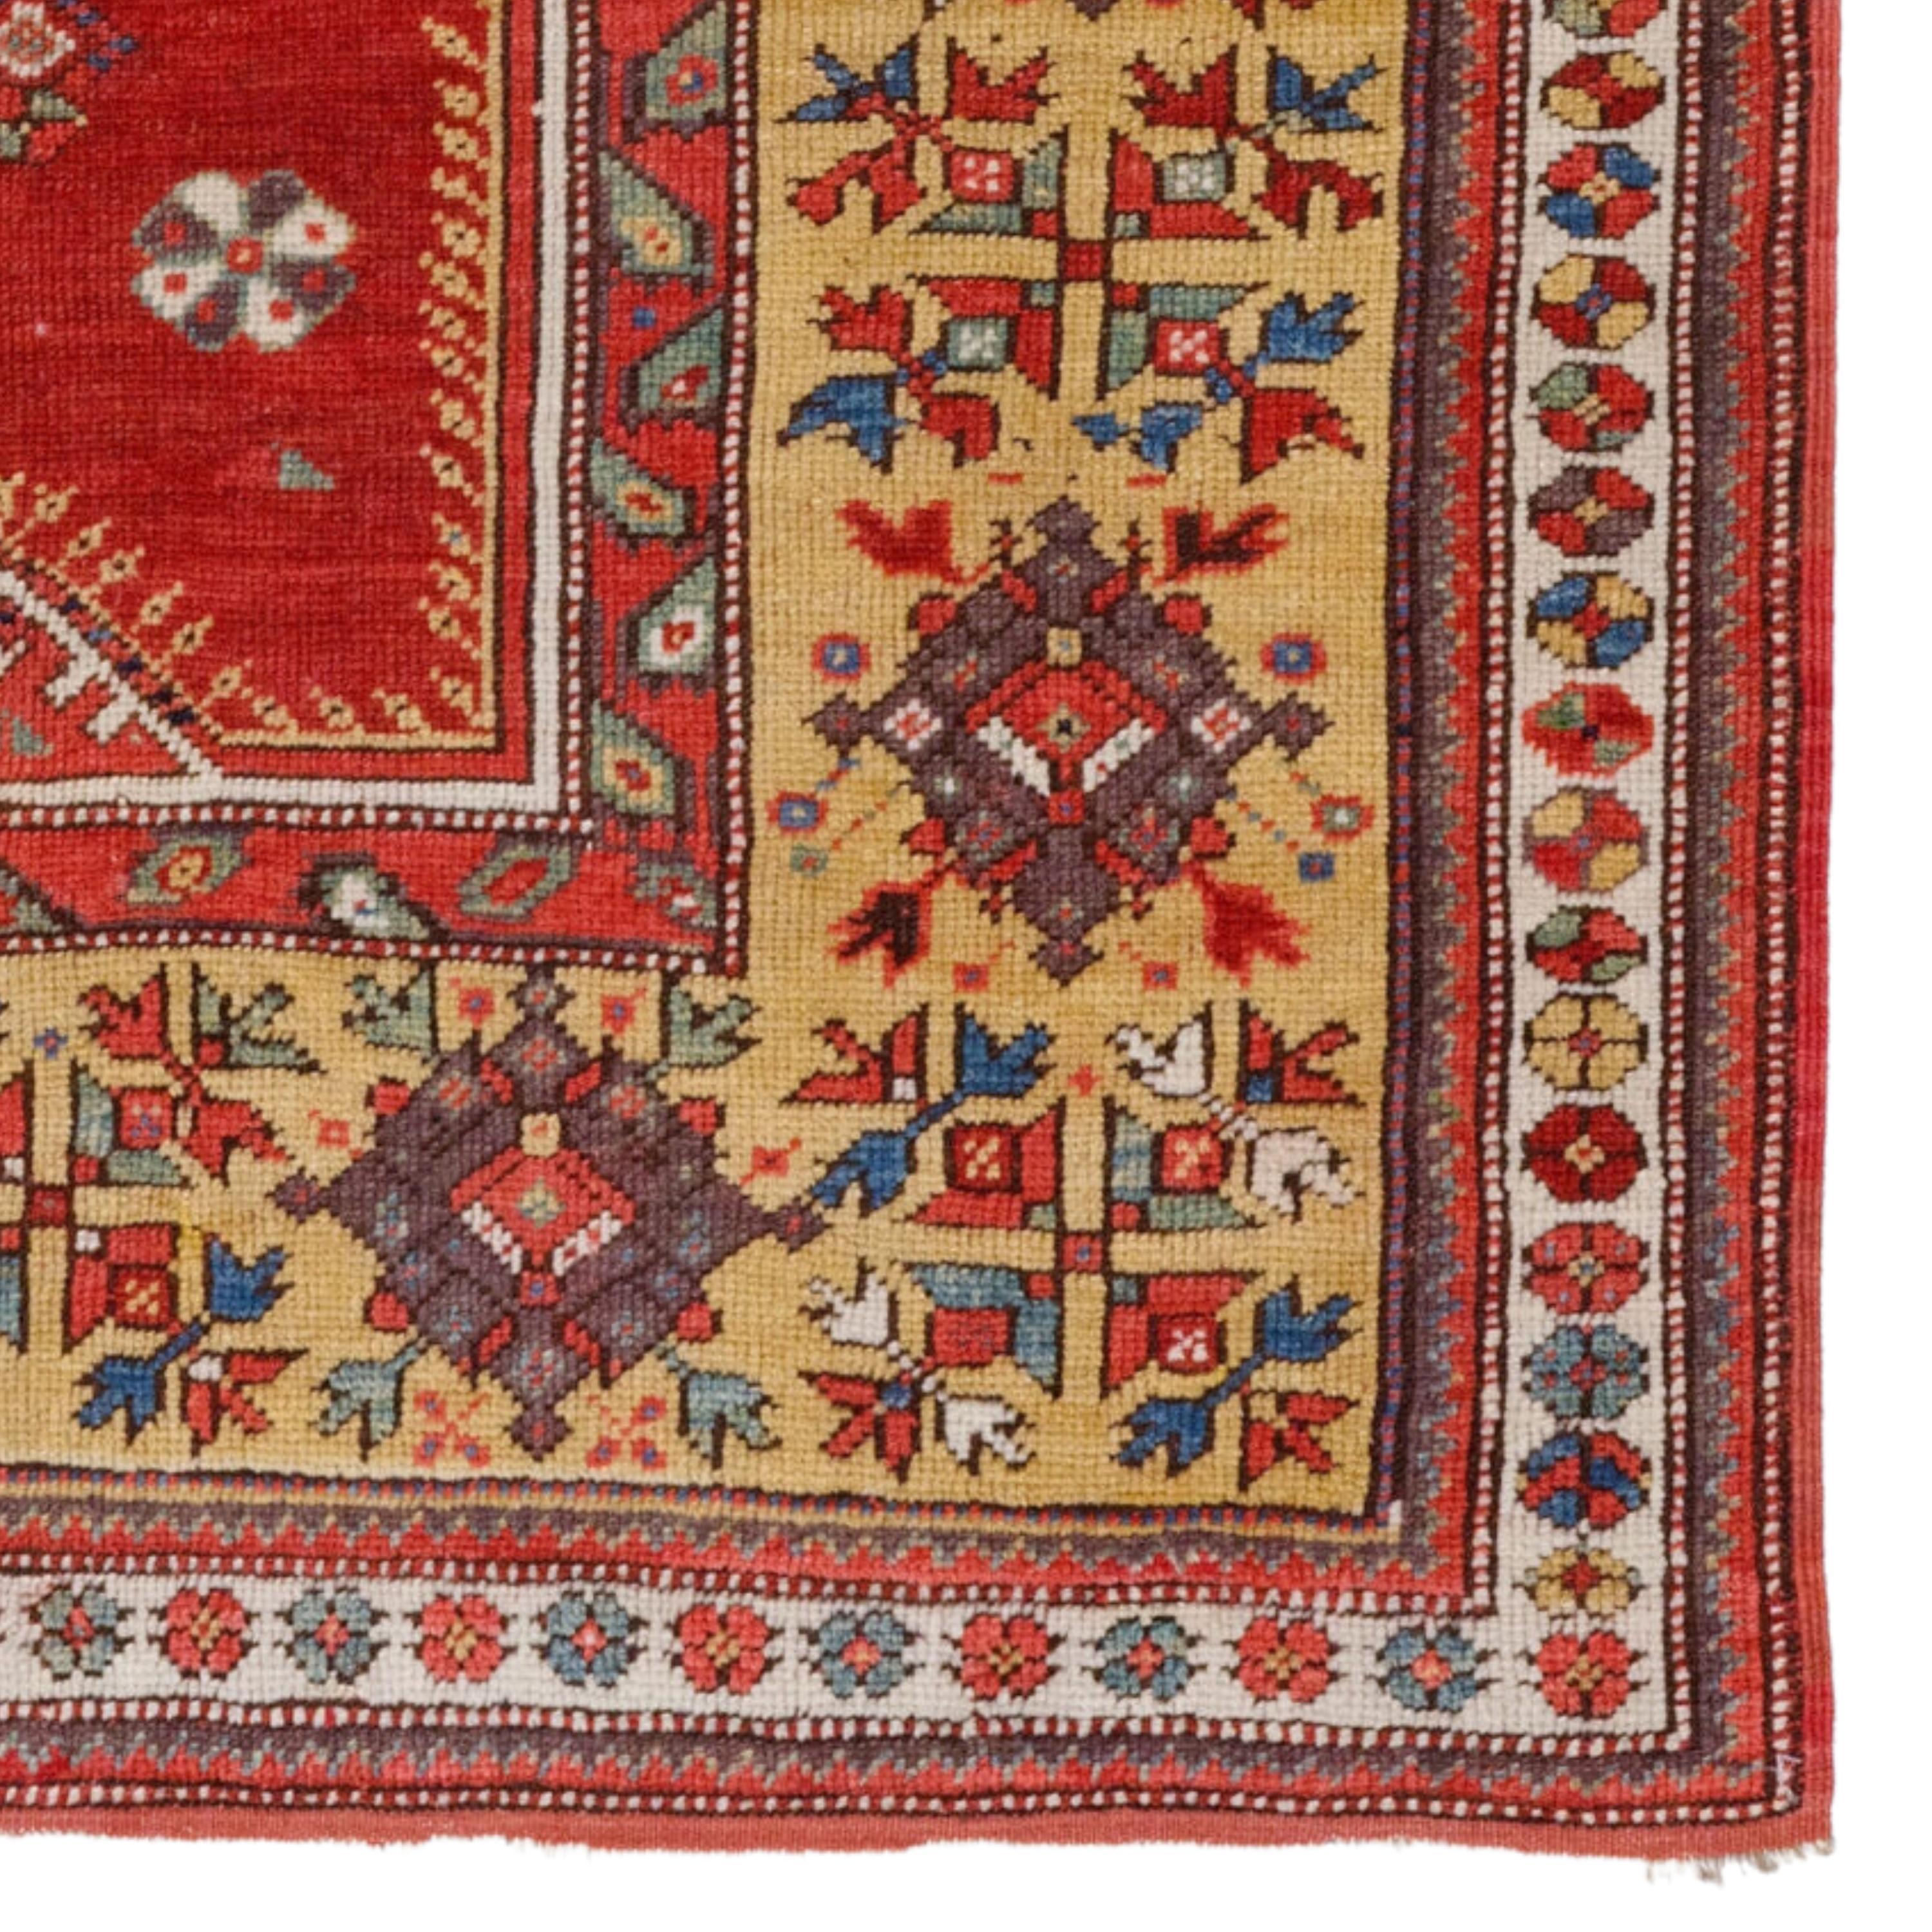 Wool Antique Melas Prayer Rug - Middle Of The 19th Century Anatolian Milas Prayer Rug For Sale